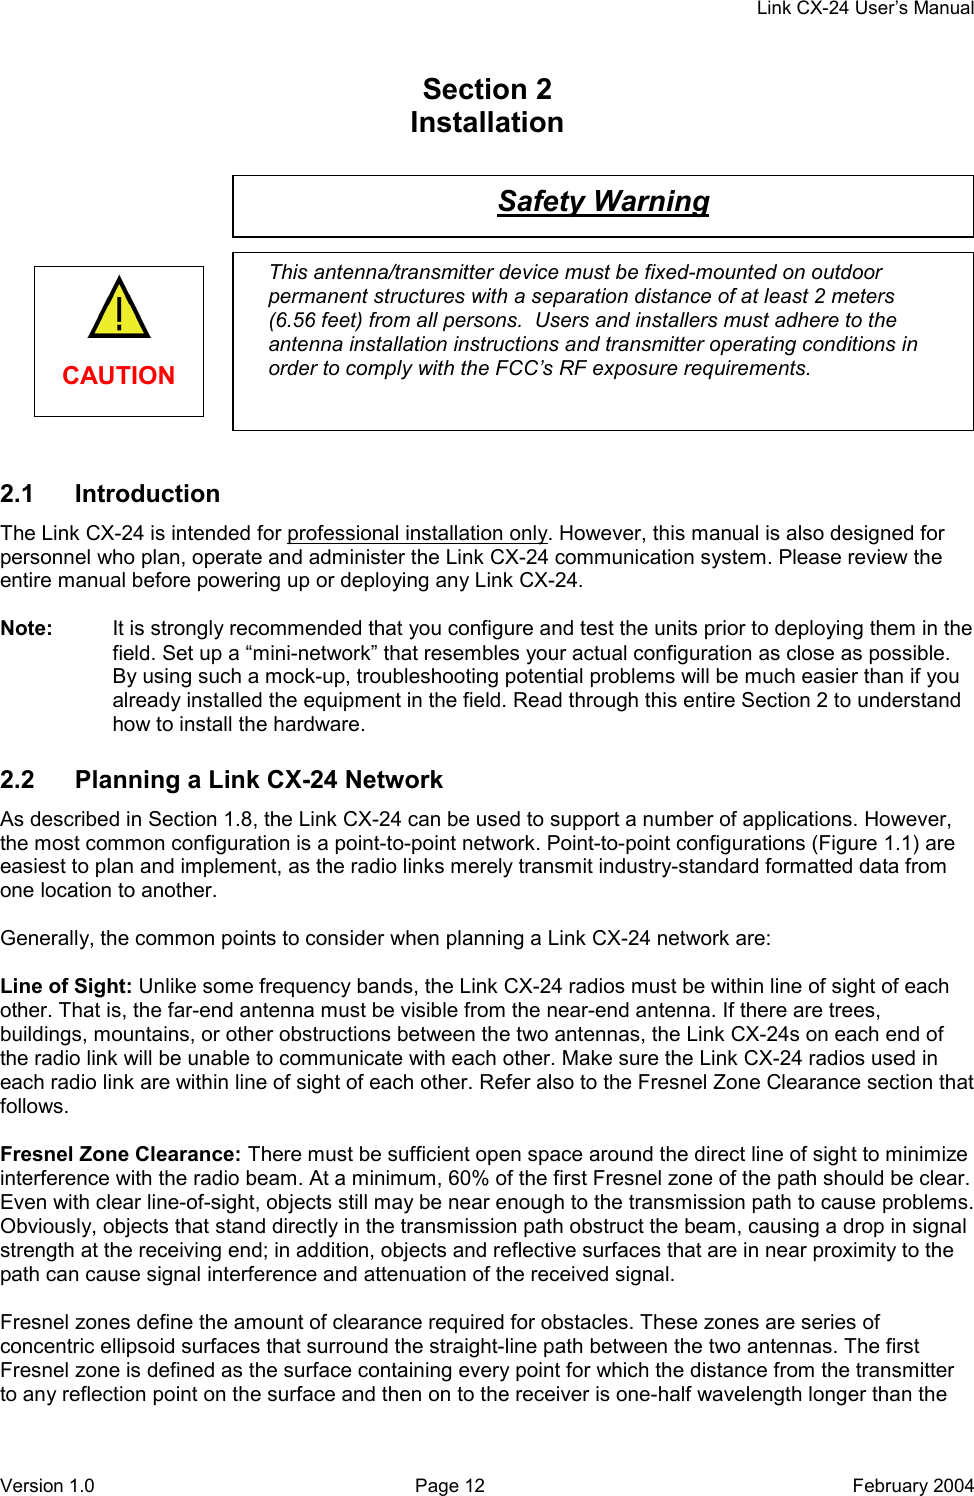     Link CX-24 User’s Manual Version 1.0  Page 12  February 2004 Safety Warning This antenna/transmitter device must be fixed-mounted on outdoor permanent structures with a separation distance of at least 2 meters (6.56 feet) from all persons.  Users and installers must adhere to the antenna installation instructions and transmitter operating conditions in order to comply with the FCC’s RF exposure requirements. Section 2    Installation              2.1 Introduction The Link CX-24 is intended for professional installation only. However, this manual is also designed for personnel who plan, operate and administer the Link CX-24 communication system. Please review the entire manual before powering up or deploying any Link CX-24.  Note:  It is strongly recommended that you configure and test the units prior to deploying them in the field. Set up a “mini-network” that resembles your actual configuration as close as possible. By using such a mock-up, troubleshooting potential problems will be much easier than if you already installed the equipment in the field. Read through this entire Section 2 to understand how to install the hardware. 2.2  Planning a Link CX-24 Network As described in Section 1.8, the Link CX-24 can be used to support a number of applications. However, the most common configuration is a point-to-point network. Point-to-point configurations (Figure 1.1) are easiest to plan and implement, as the radio links merely transmit industry-standard formatted data from one location to another.  Generally, the common points to consider when planning a Link CX-24 network are:  Line of Sight: Unlike some frequency bands, the Link CX-24 radios must be within line of sight of each other. That is, the far-end antenna must be visible from the near-end antenna. If there are trees, buildings, mountains, or other obstructions between the two antennas, the Link CX-24s on each end of the radio link will be unable to communicate with each other. Make sure the Link CX-24 radios used in each radio link are within line of sight of each other. Refer also to the Fresnel Zone Clearance section that follows.  Fresnel Zone Clearance: There must be sufficient open space around the direct line of sight to minimize interference with the radio beam. At a minimum, 60% of the first Fresnel zone of the path should be clear. Even with clear line-of-sight, objects still may be near enough to the transmission path to cause problems. Obviously, objects that stand directly in the transmission path obstruct the beam, causing a drop in signal strength at the receiving end; in addition, objects and reflective surfaces that are in near proximity to the path can cause signal interference and attenuation of the received signal.  Fresnel zones define the amount of clearance required for obstacles. These zones are series of concentric ellipsoid surfaces that surround the straight-line path between the two antennas. The first Fresnel zone is defined as the surface containing every point for which the distance from the transmitter to any reflection point on the surface and then on to the receiver is one-half wavelength longer than the   CAUTION 